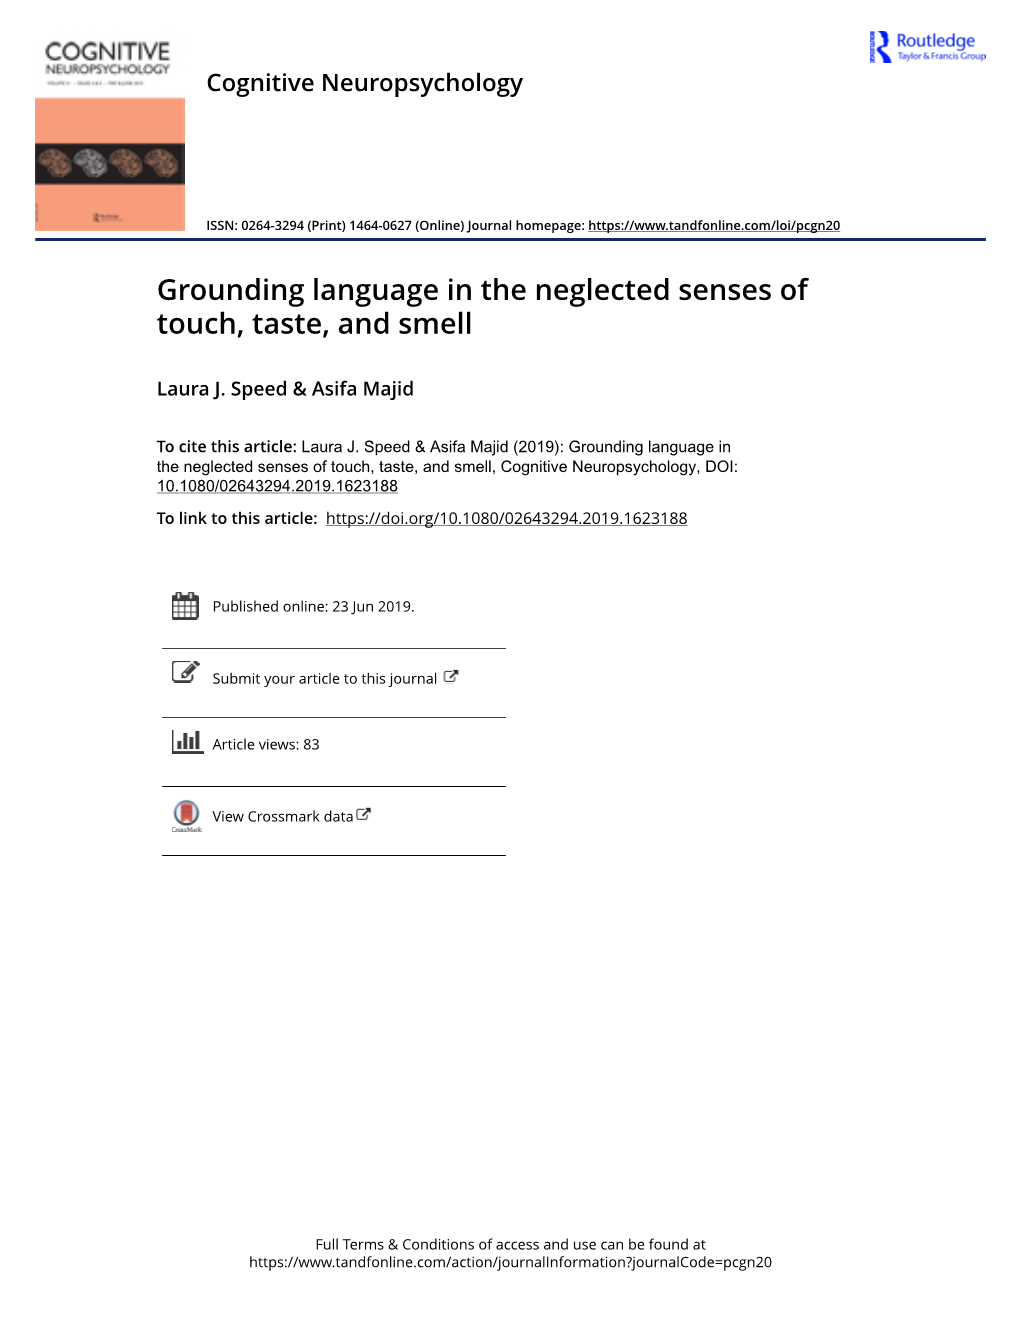 Grounding Language in the Neglected Senses of Touch, Taste, and Smell